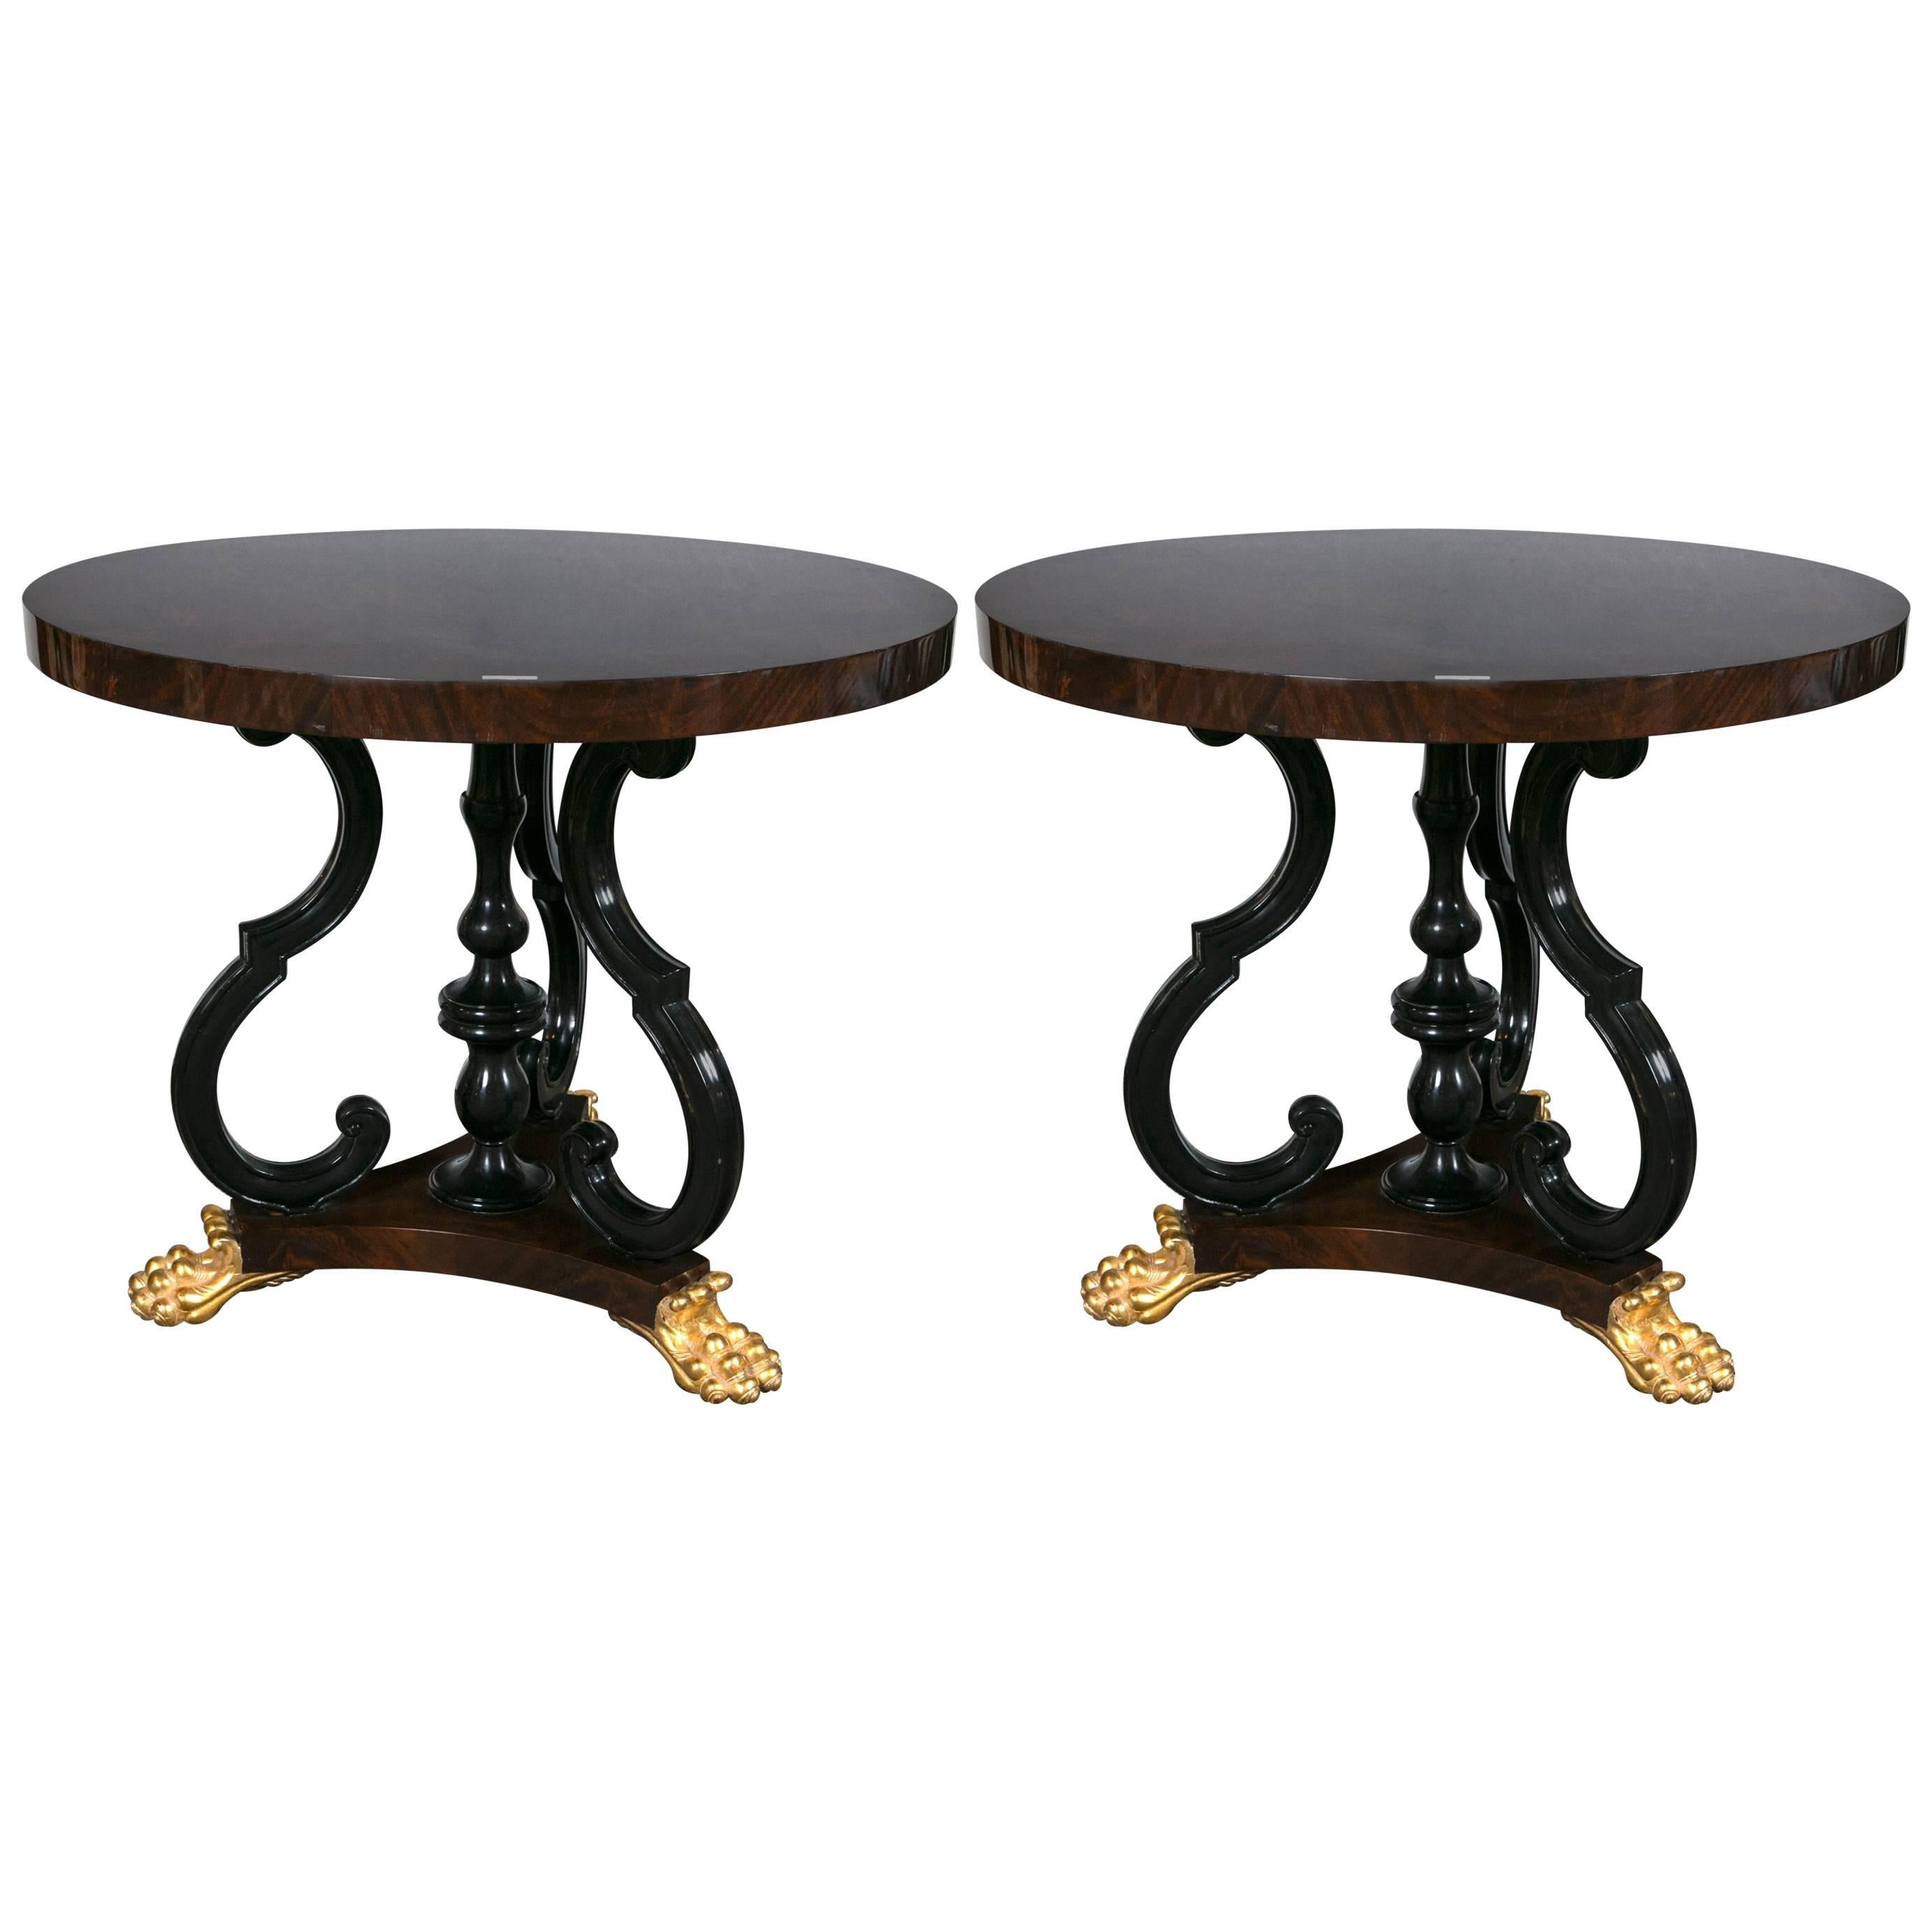 Pair of Jonathan Charles Mahogany Centre Table with Gilded Lions Paw Feet 